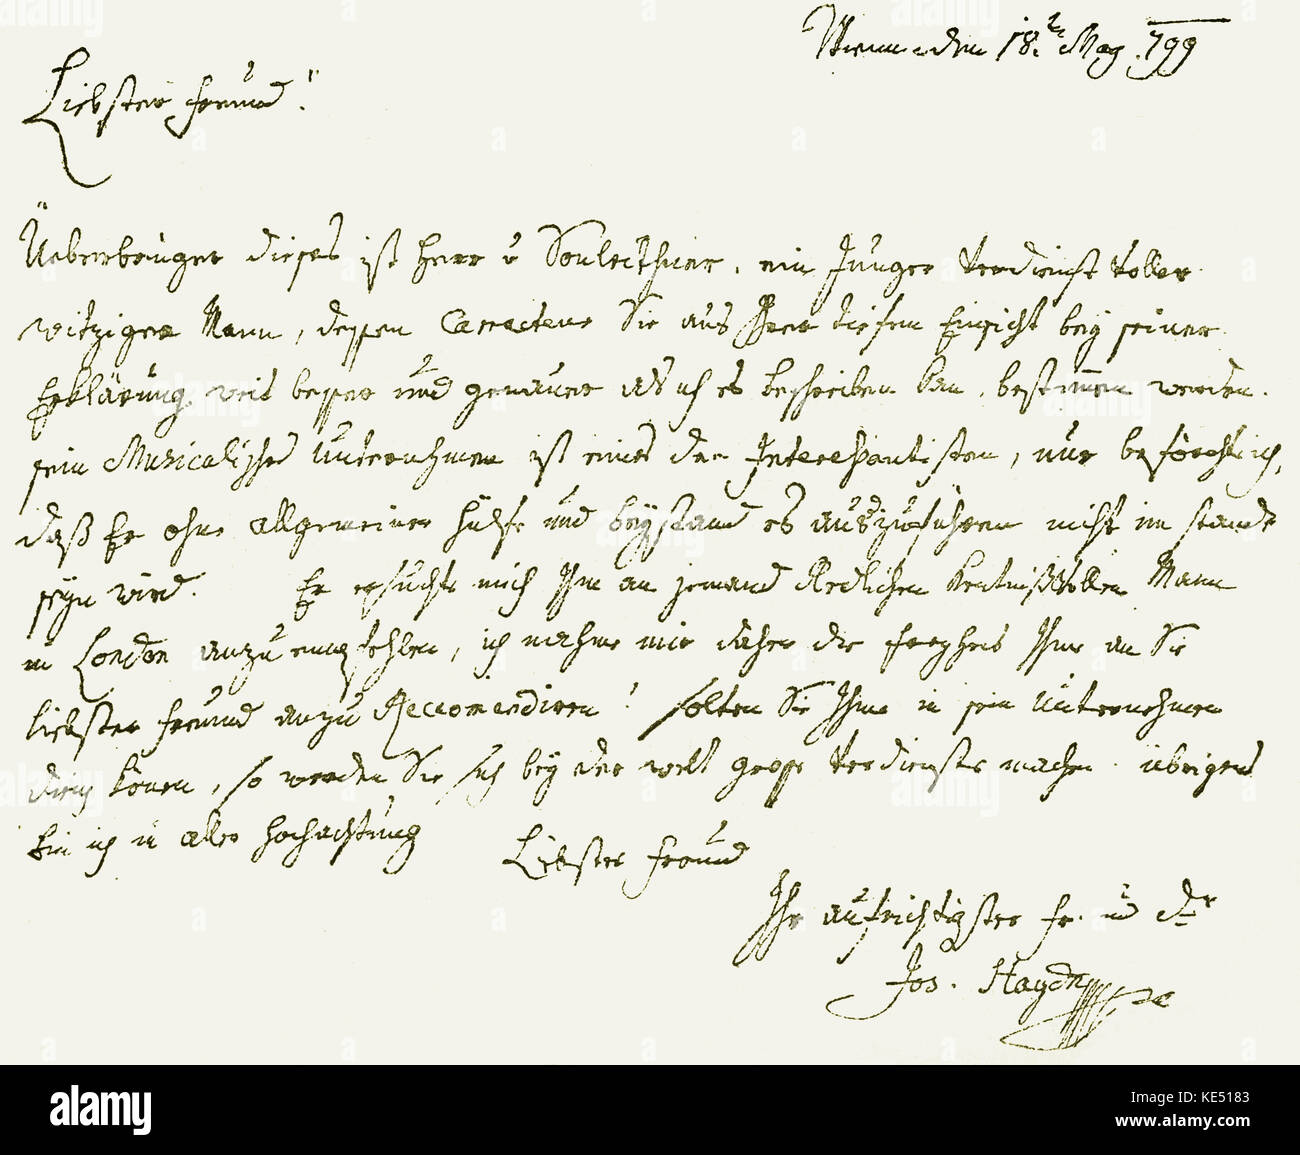 Franz Joseph Haydn - letter from the Austrian composer to Johann Peter Salomon of London. Dated 18 May 1799, Vienna. Translation: 'Dearest Friend, The bearer of this, is a young man of great attainments, and whose character you will, with your deep knowledge of human nature, gauge more accurately than I can describe it to you. His proposed musical enterprise is most interesting, but I fear without help he will not be able to carry it out. He has begged me to recommend him to some capable man in London, and I have therefore taken the liberty of sending him to you. If you can further his object, Stock Photo